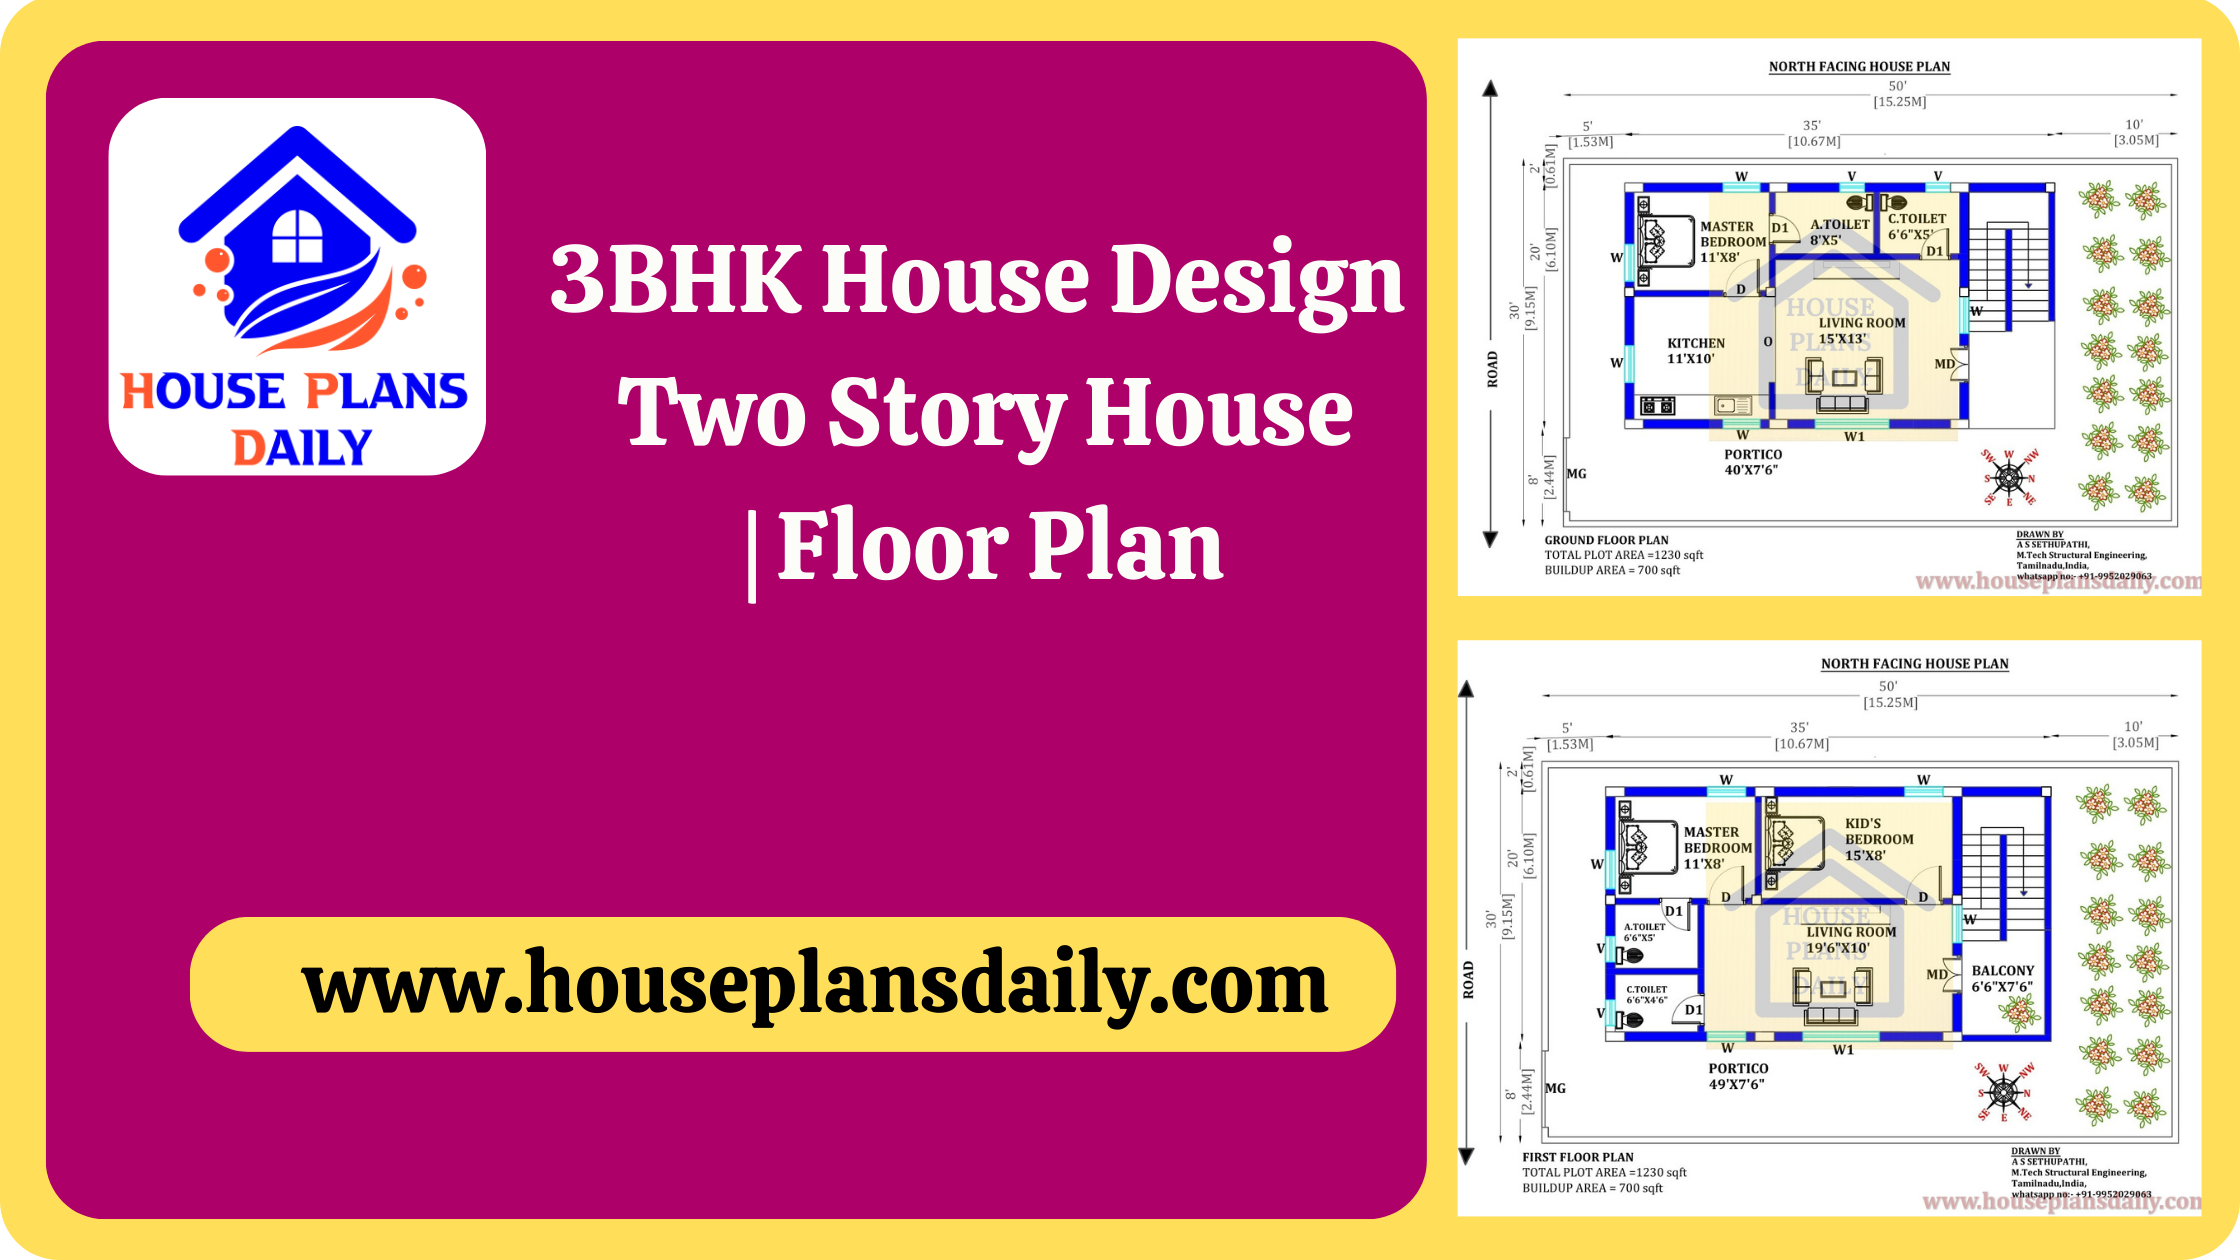 3BHK House Design | Two Story House | Floor Plan